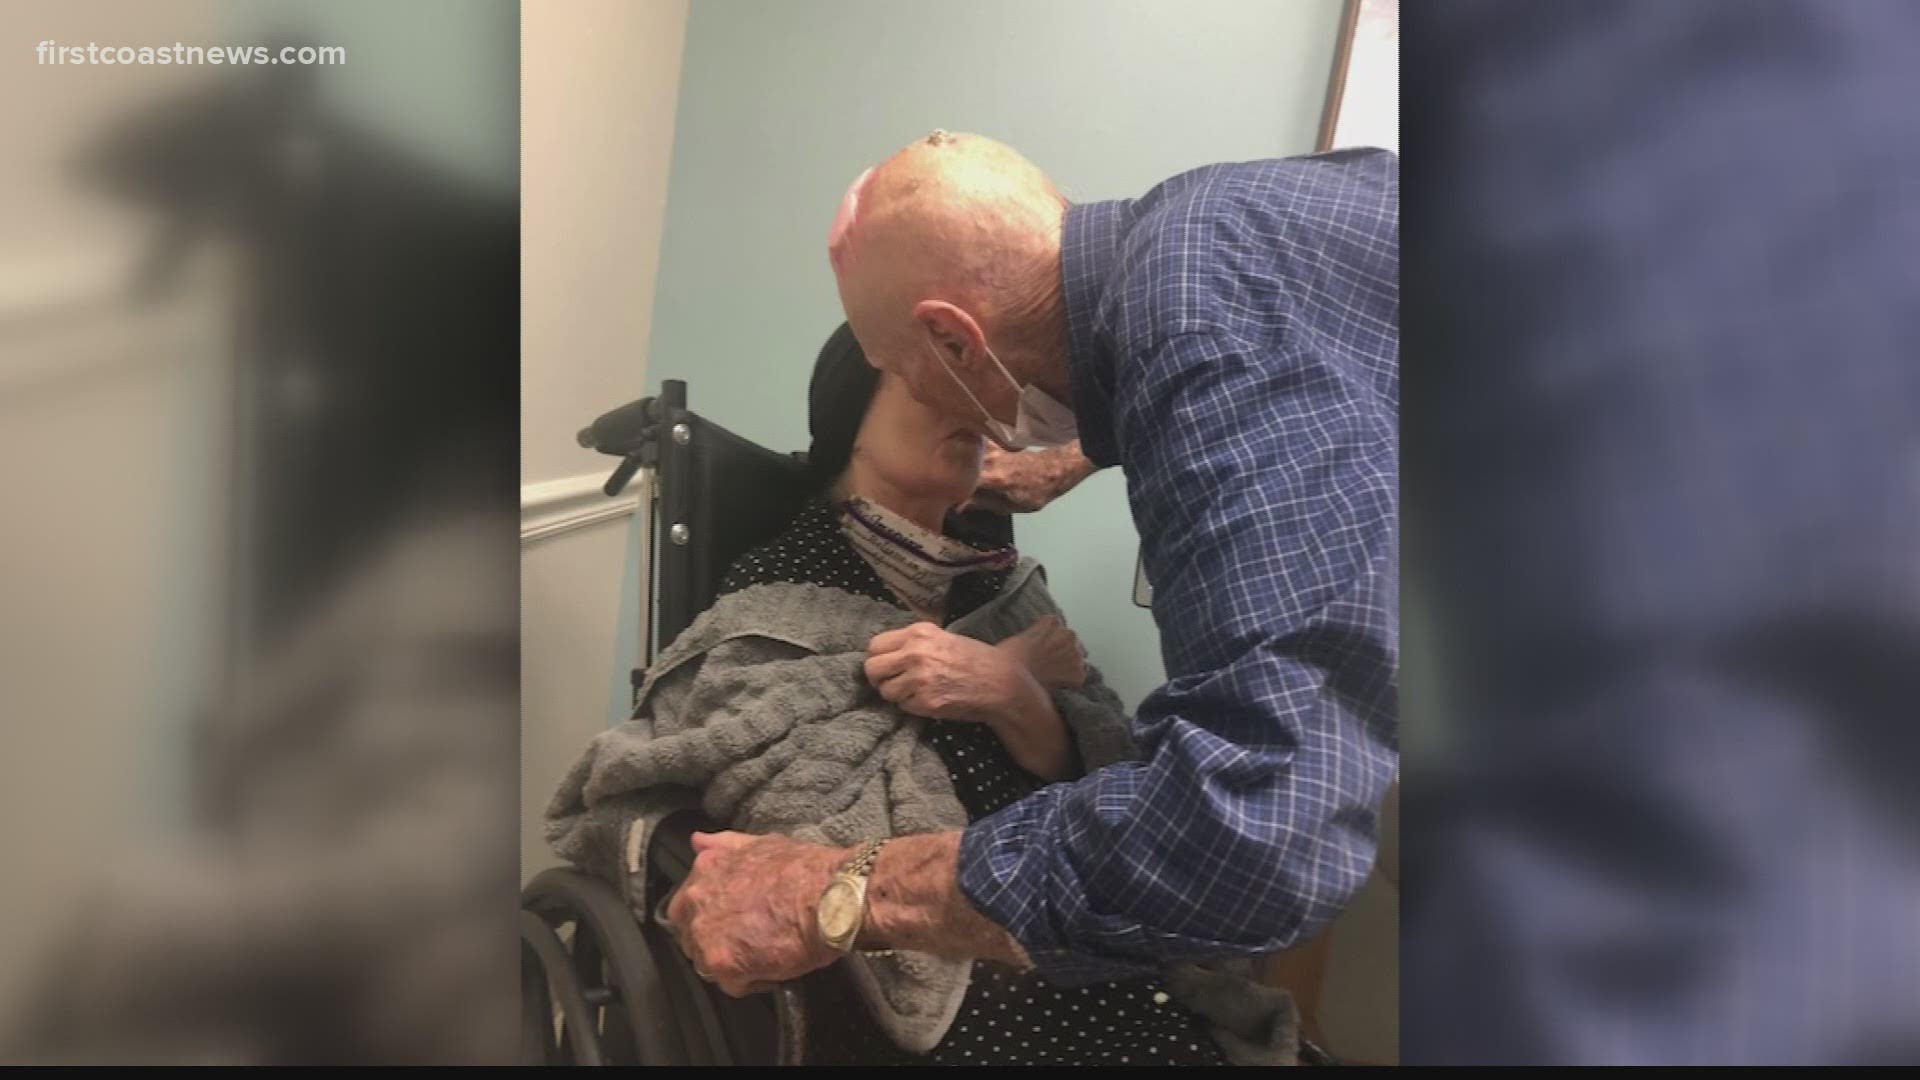 Veteran united with his wife in nursing home after forced separation due to pandemic